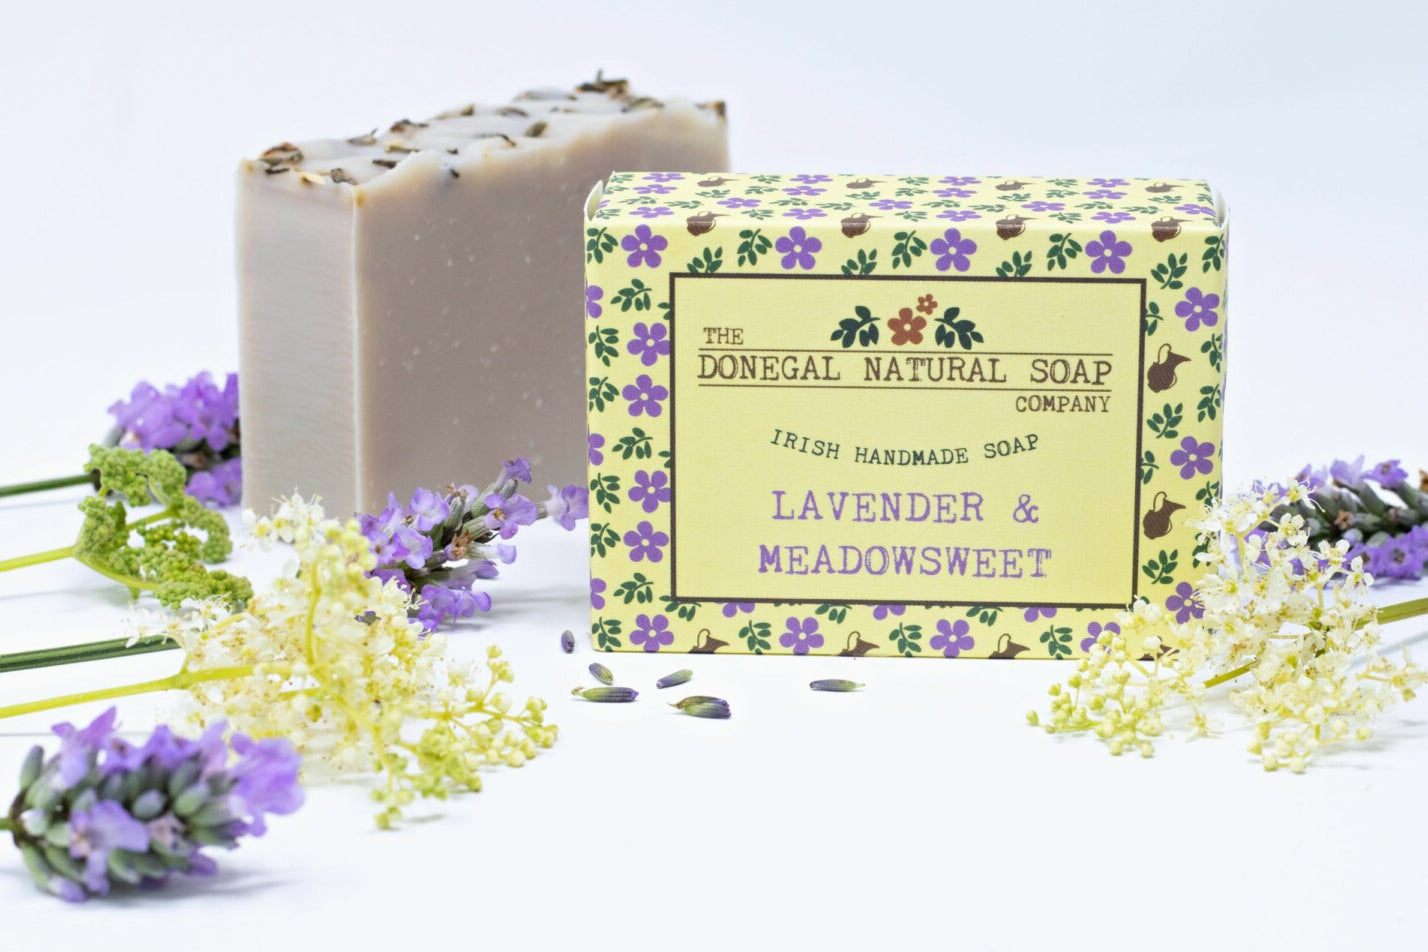 Donegal Natural Soap Company